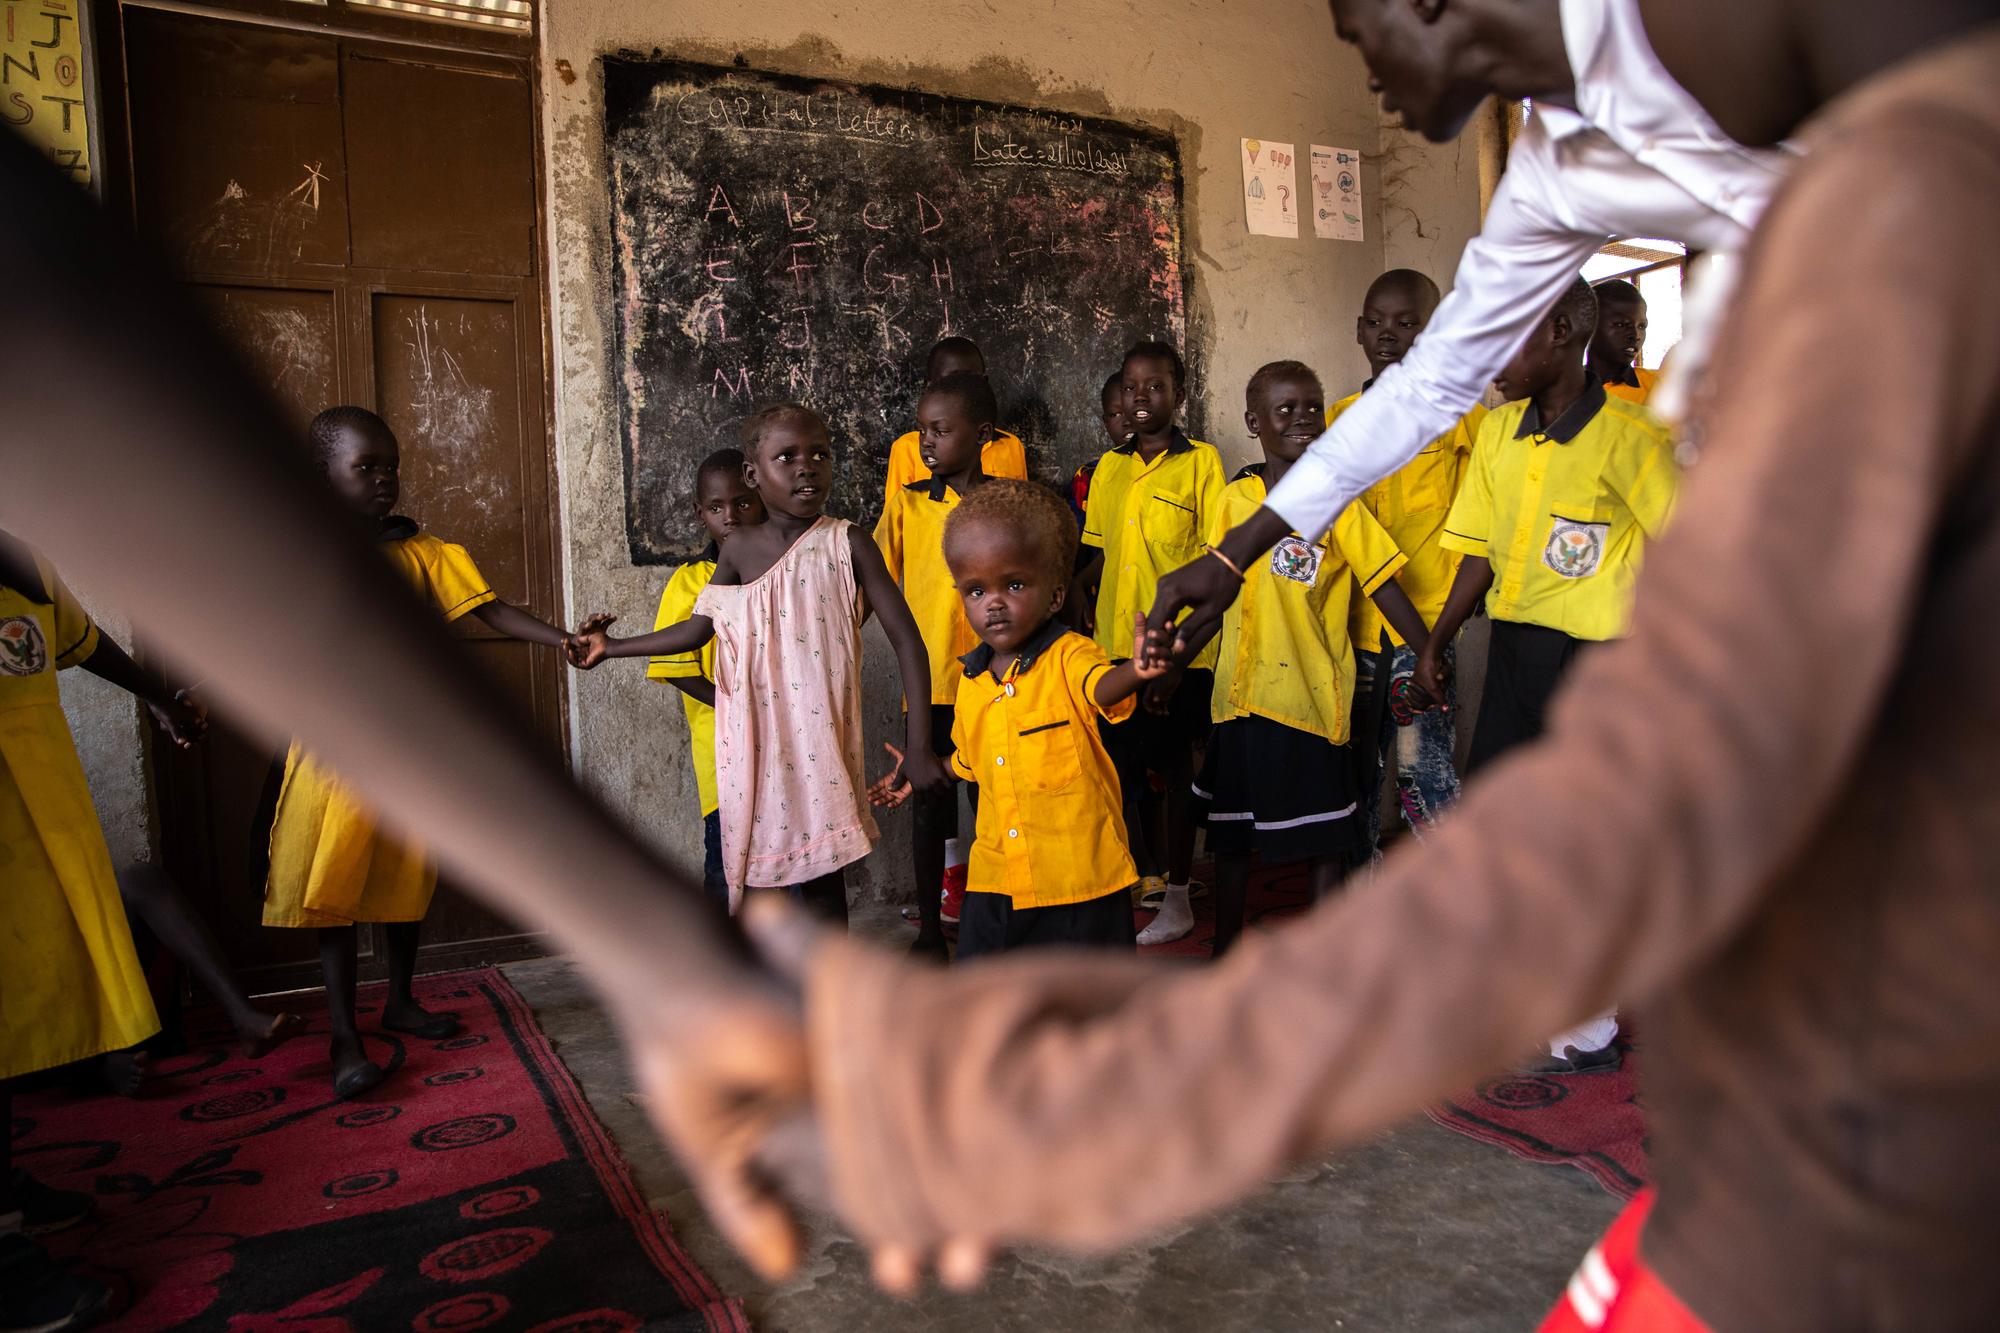 f-year old south sudanese girl nyamush has hydrocephalus. she is led by the hand of her teacher and is surrounded by her classmates, all wearing yellow and black school uniforms.